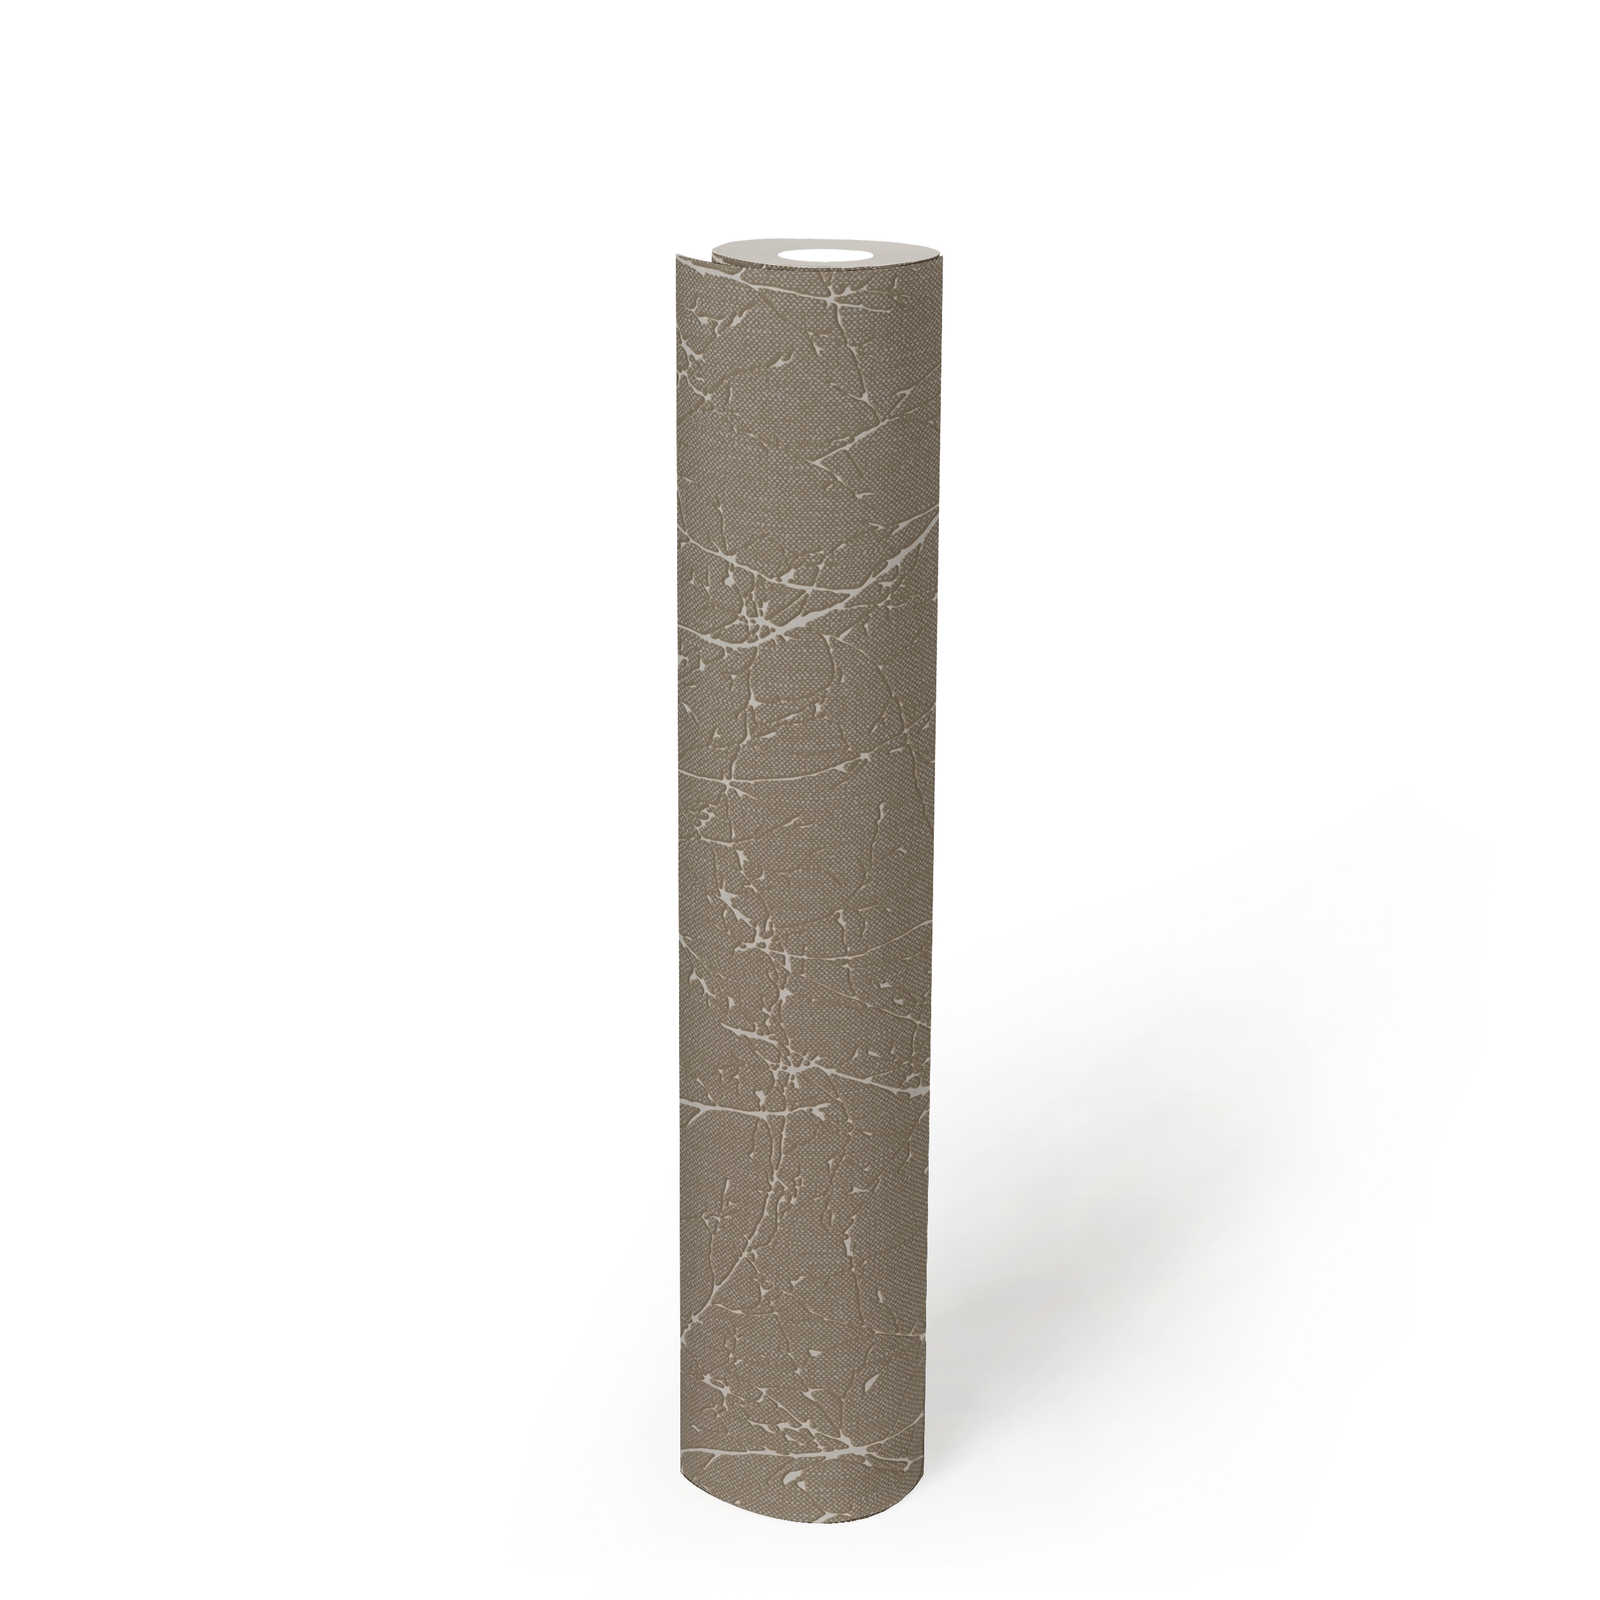             Floral non-woven wallpaper with branch pattern - brown, white
        